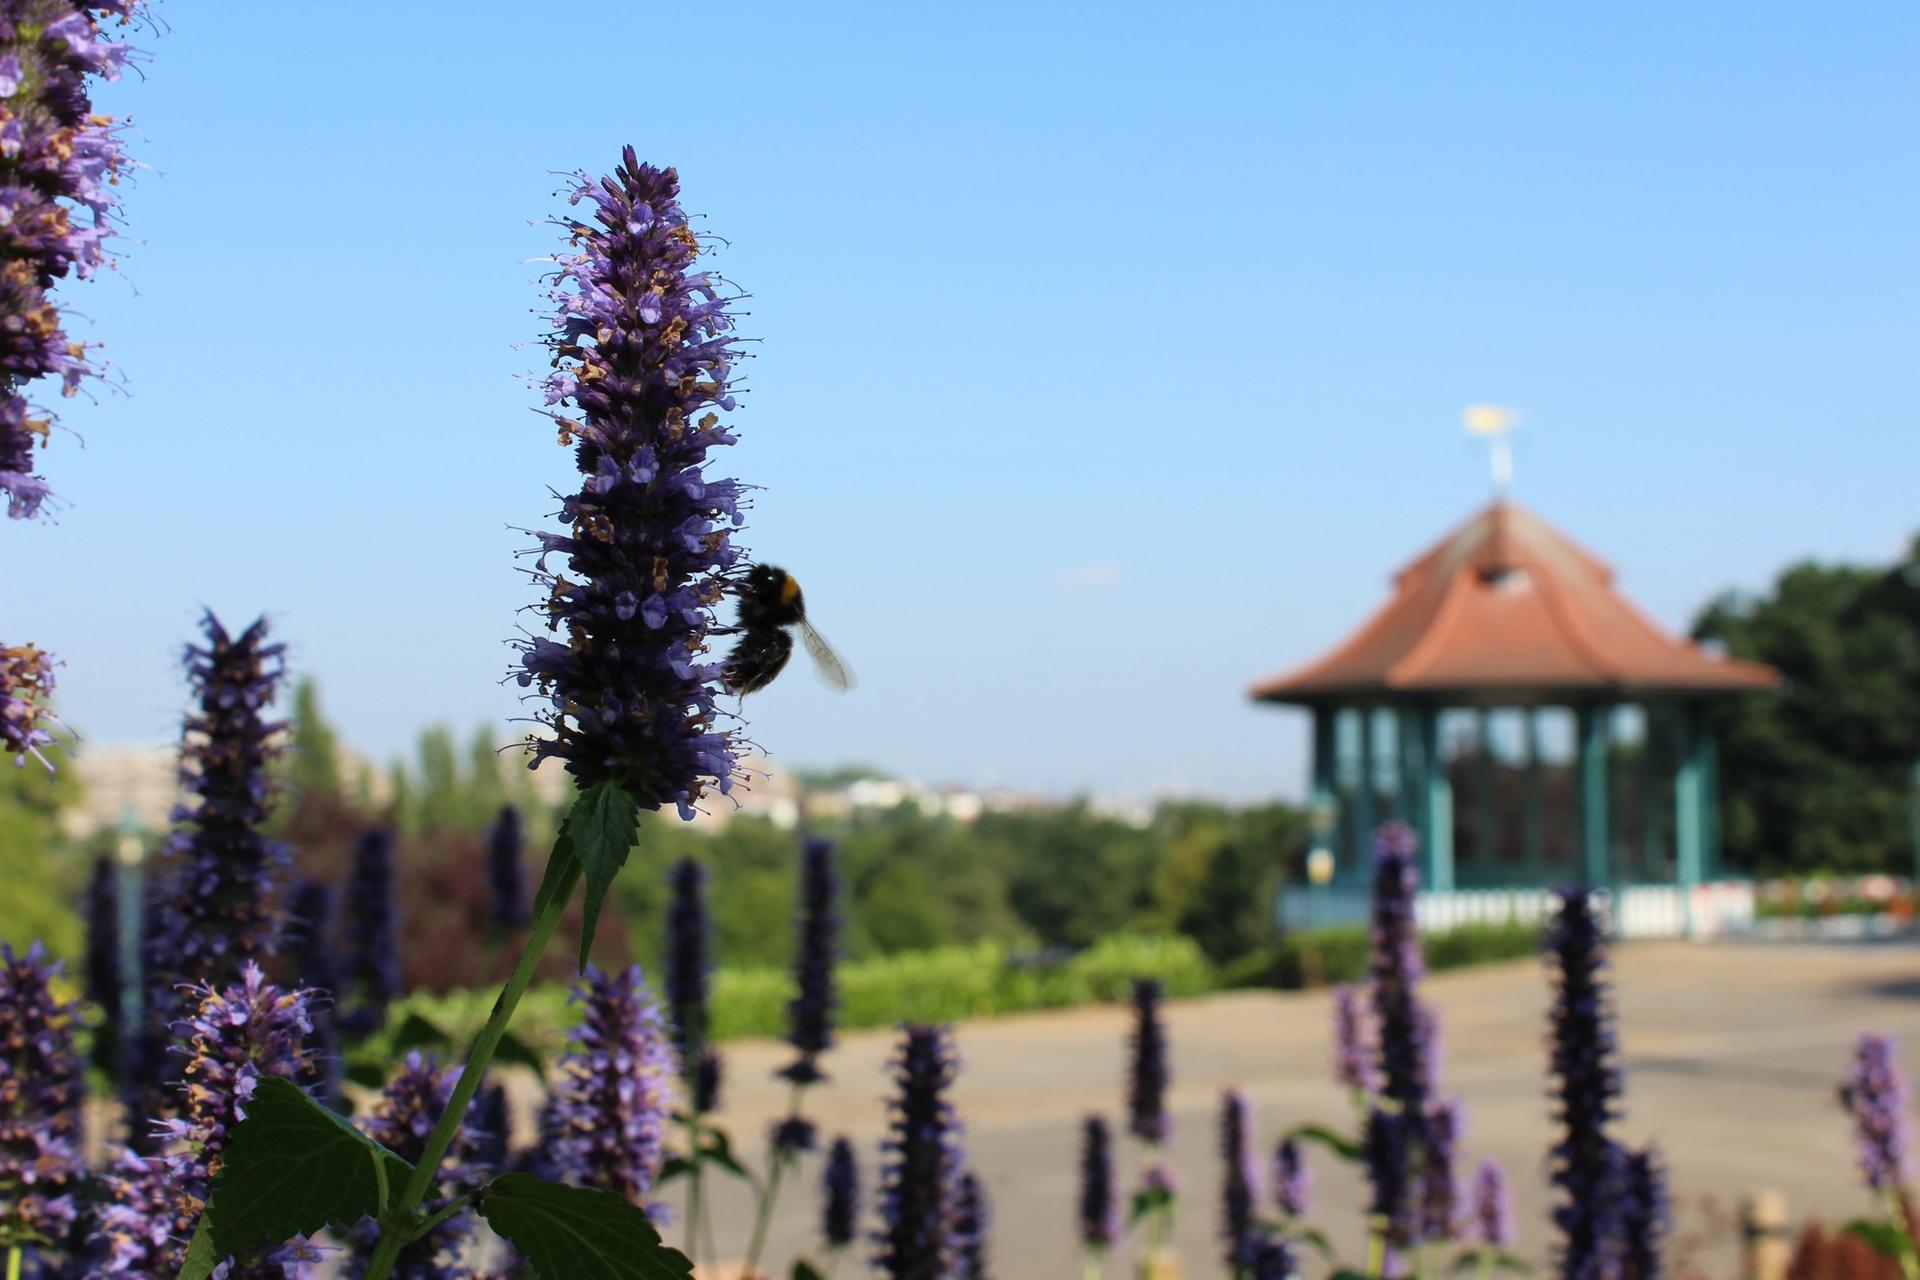 The Horniman Museum's initiatives to fight climate change include using their 16-acre garden to plant more food and pollinator beds Photo: Polly Heffer